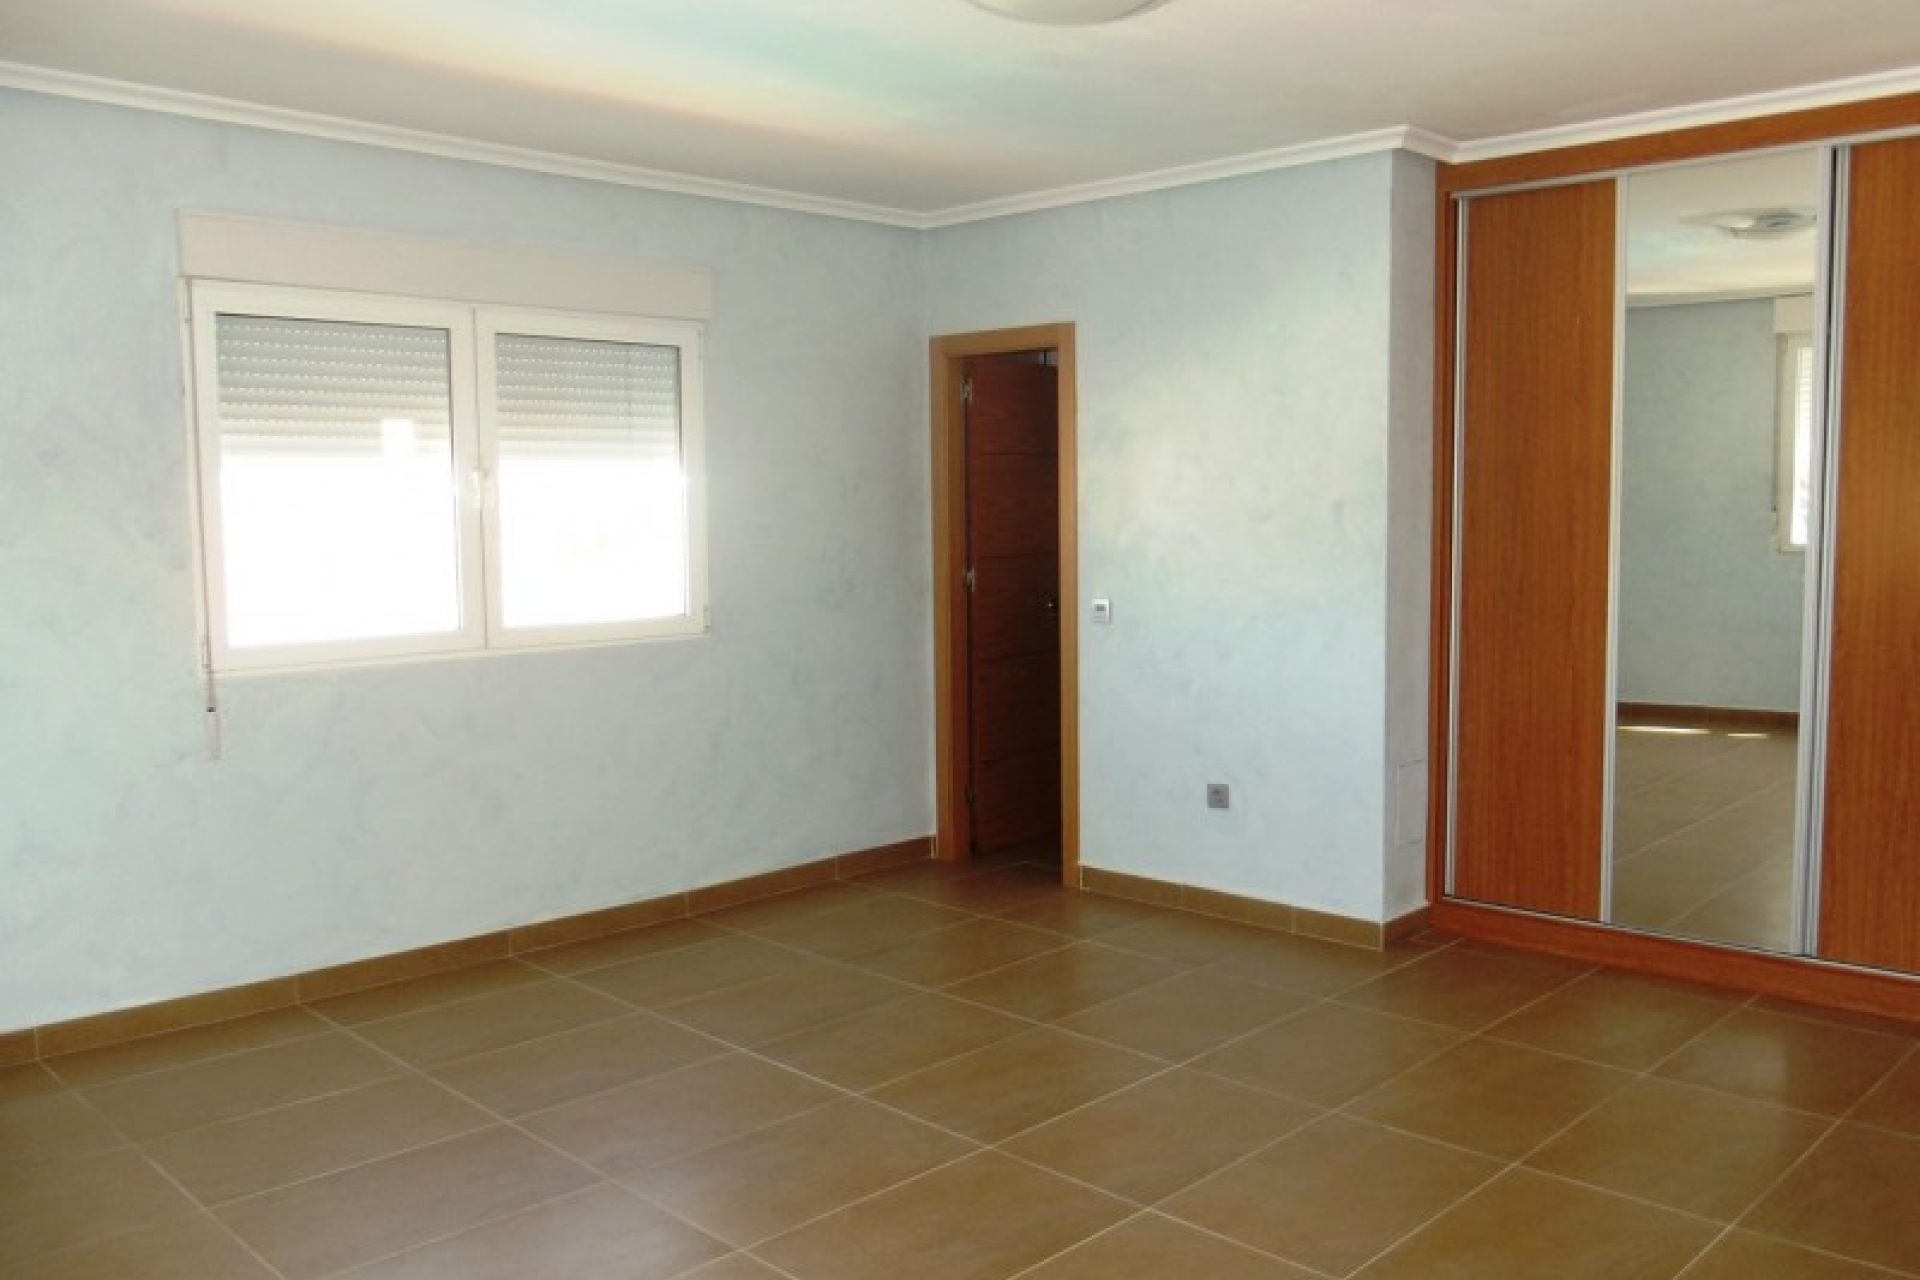 Property for sale cheap in Torreta Florida close to Torrevieja and La Siesta, bargain on Spains Costa Blanca